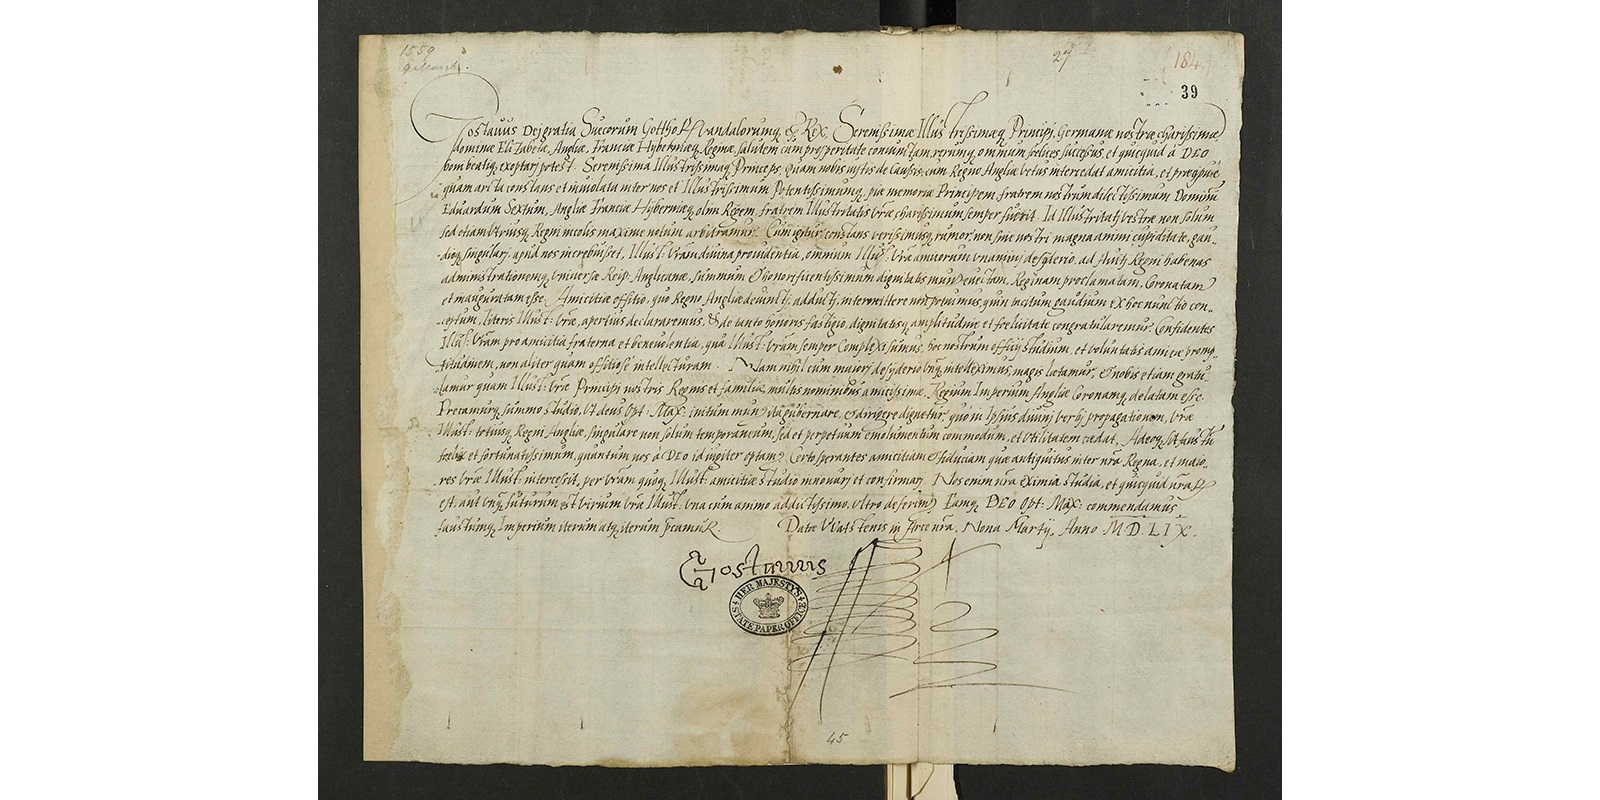 Letter of congratulation, written by hand in Latin.